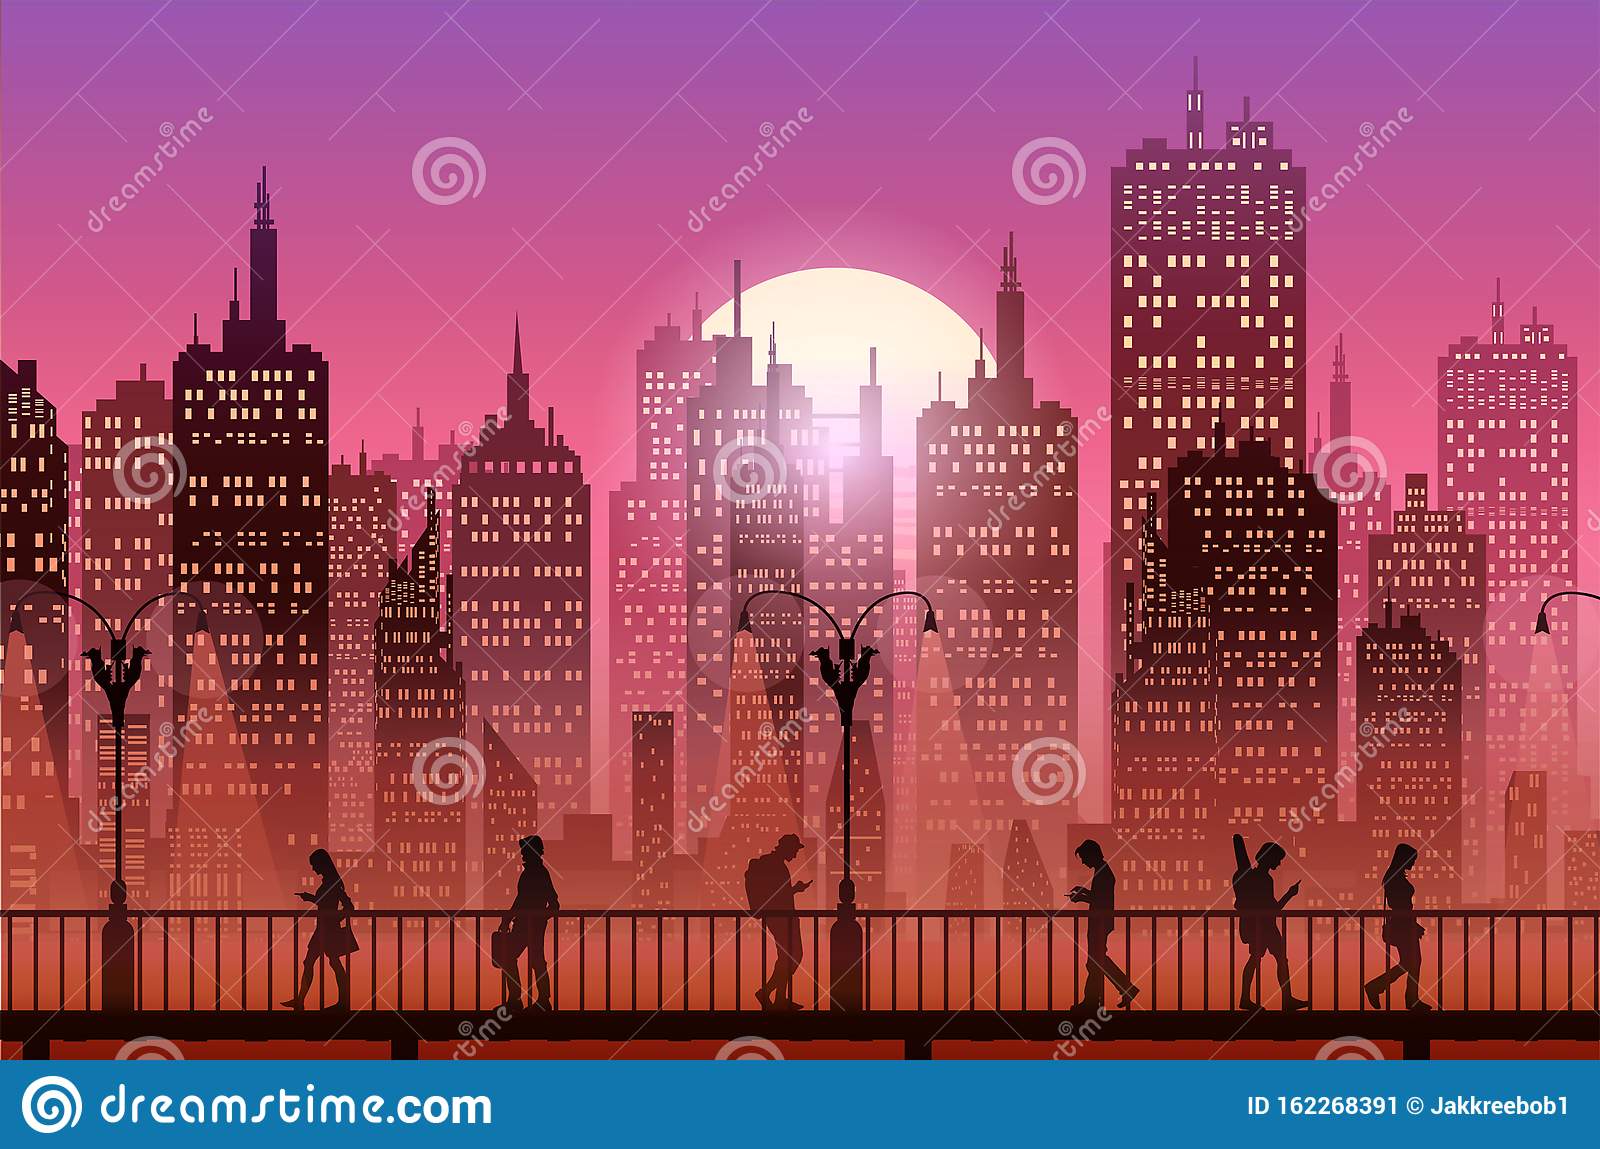 Downtown city wallpaper in the evening landscape wallpaper sunset illustration vector style sunlight colorful view background stock vector